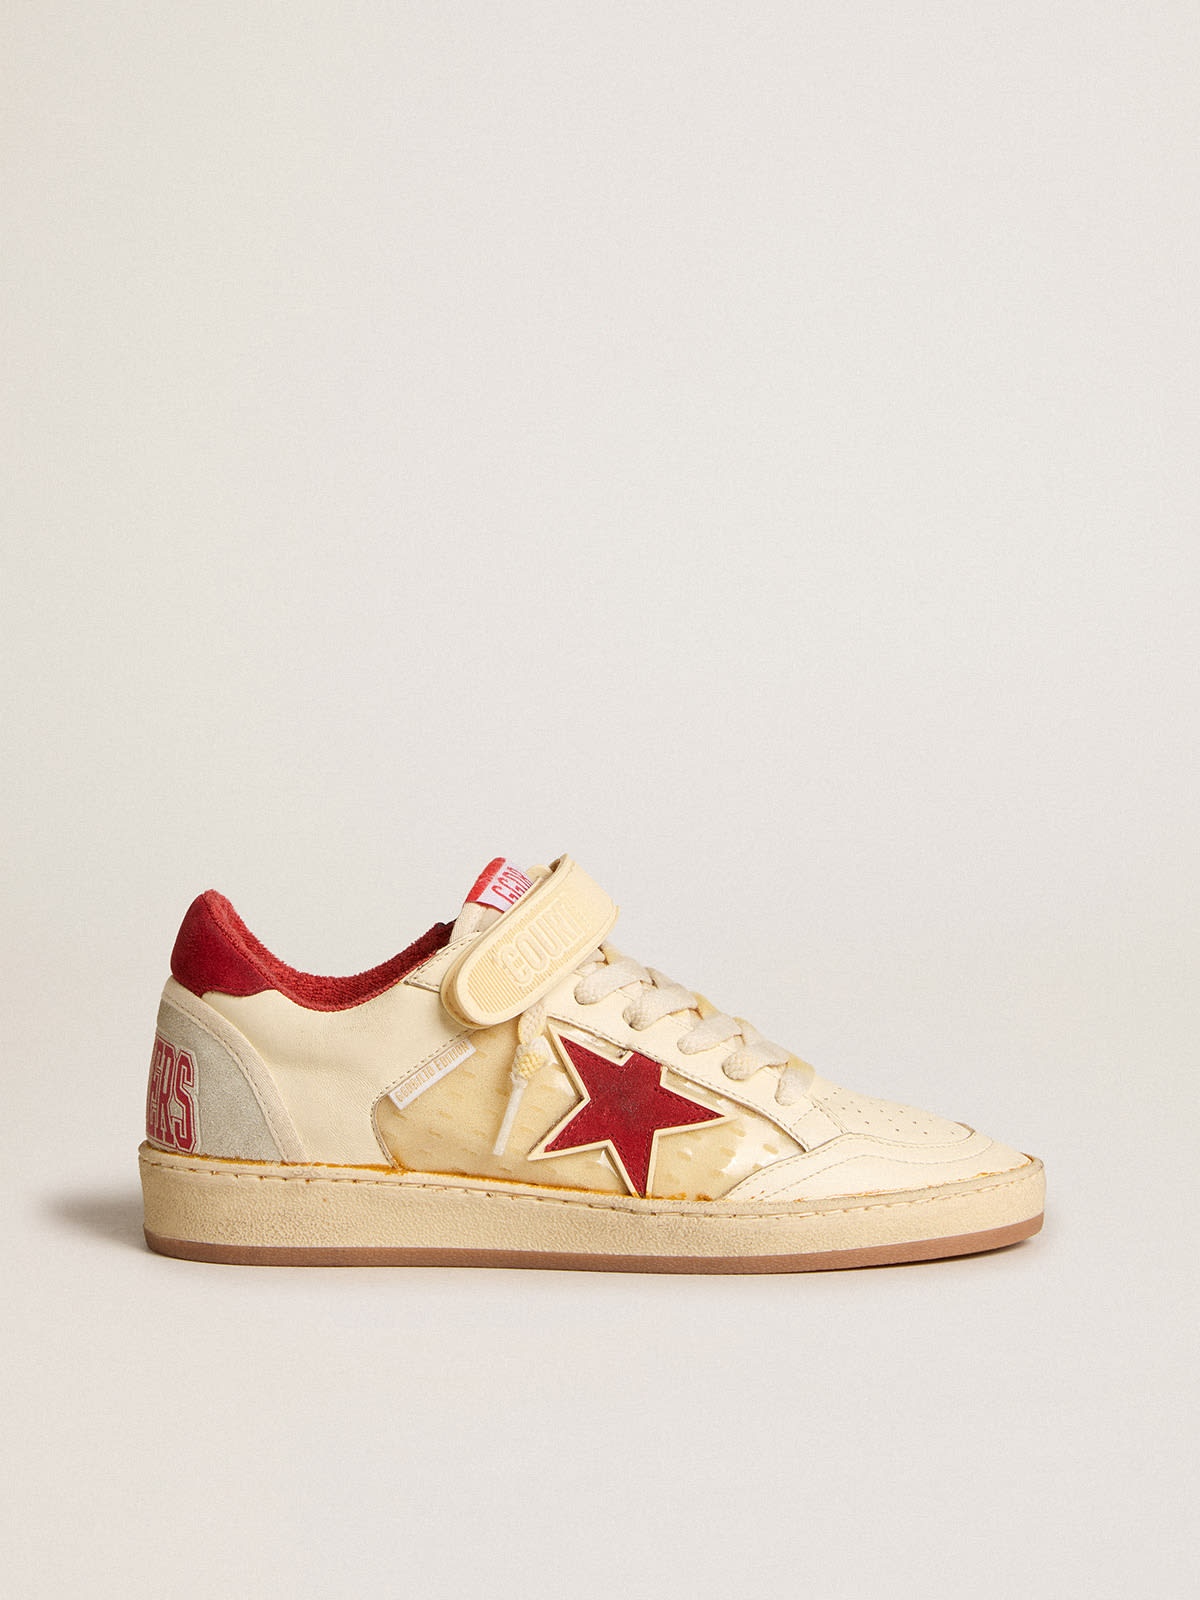 Women’s Ball Star LAB in cream-colored nappa with red suede star - 1